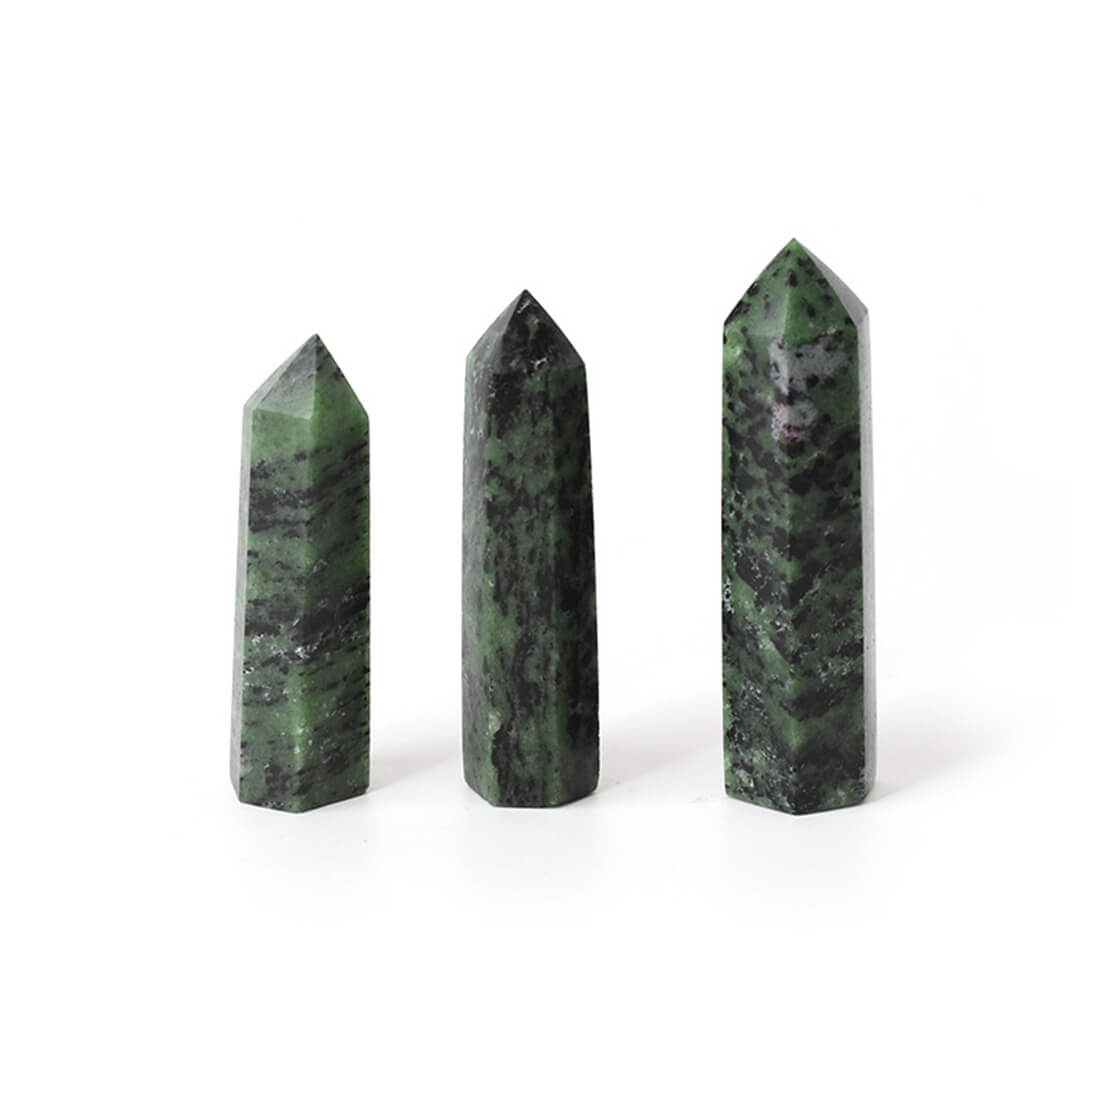 Anyolite Crystal Towers - 5 to 9 cm